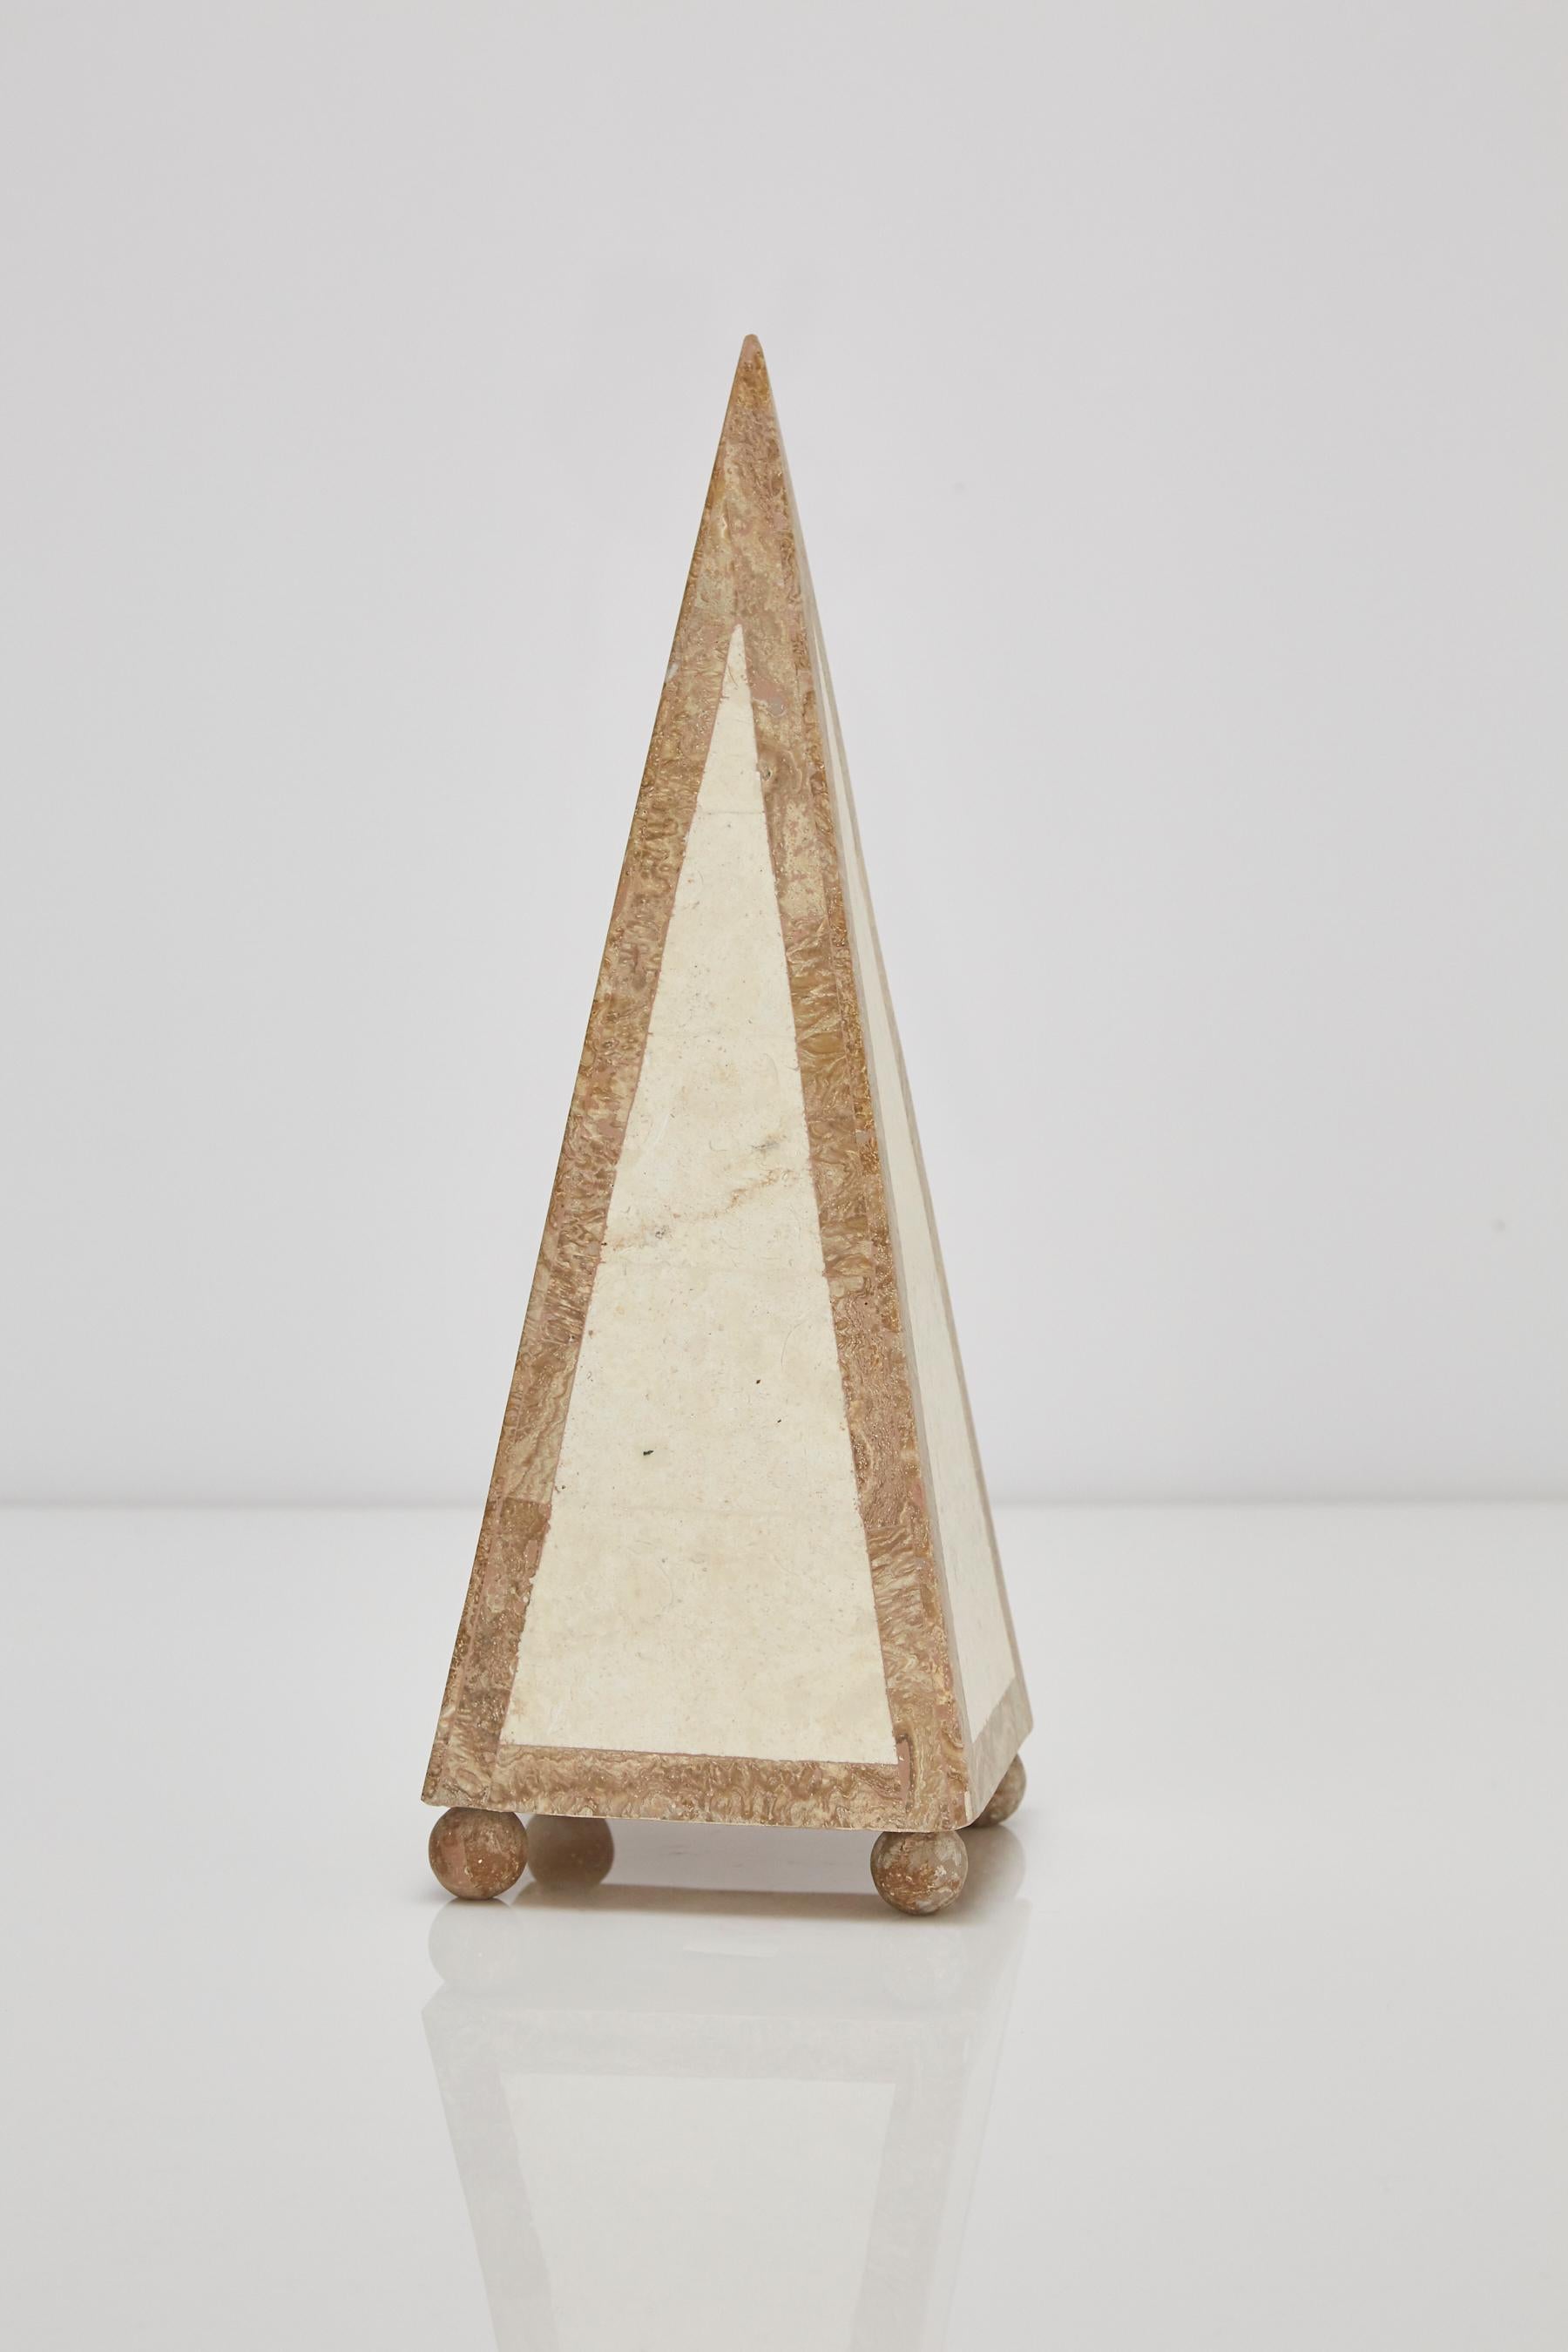 Inlay 15 in. Tall Decorative Tessellated Stone Pyramid, 1990s For Sale